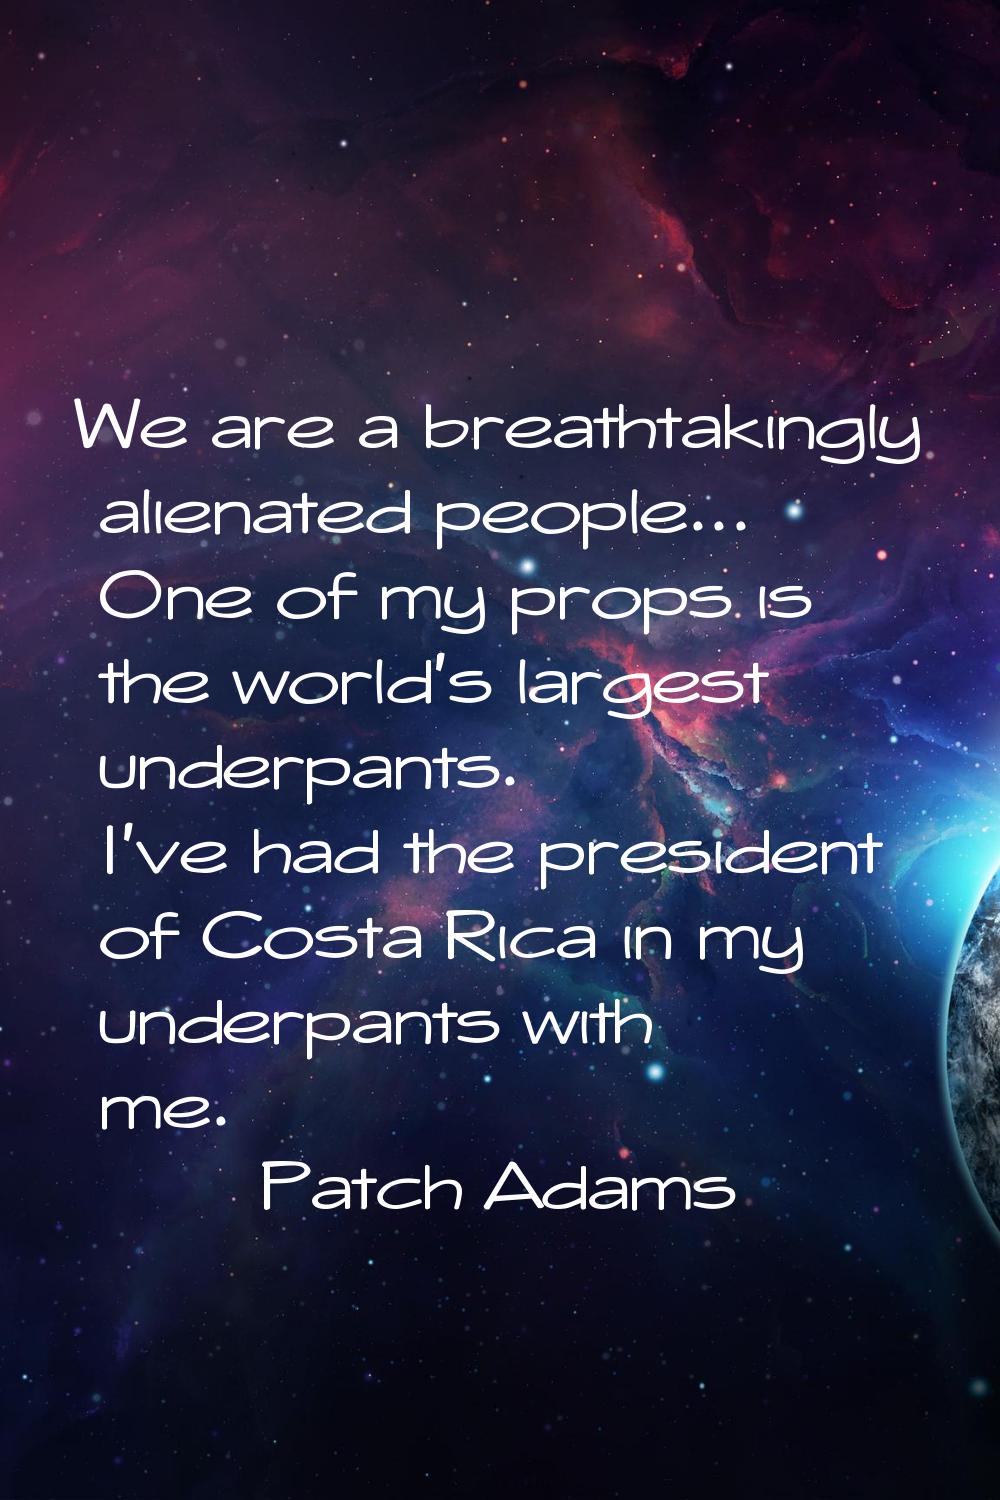 We are a breathtakingly alienated people... One of my props is the world's largest underpants. I've